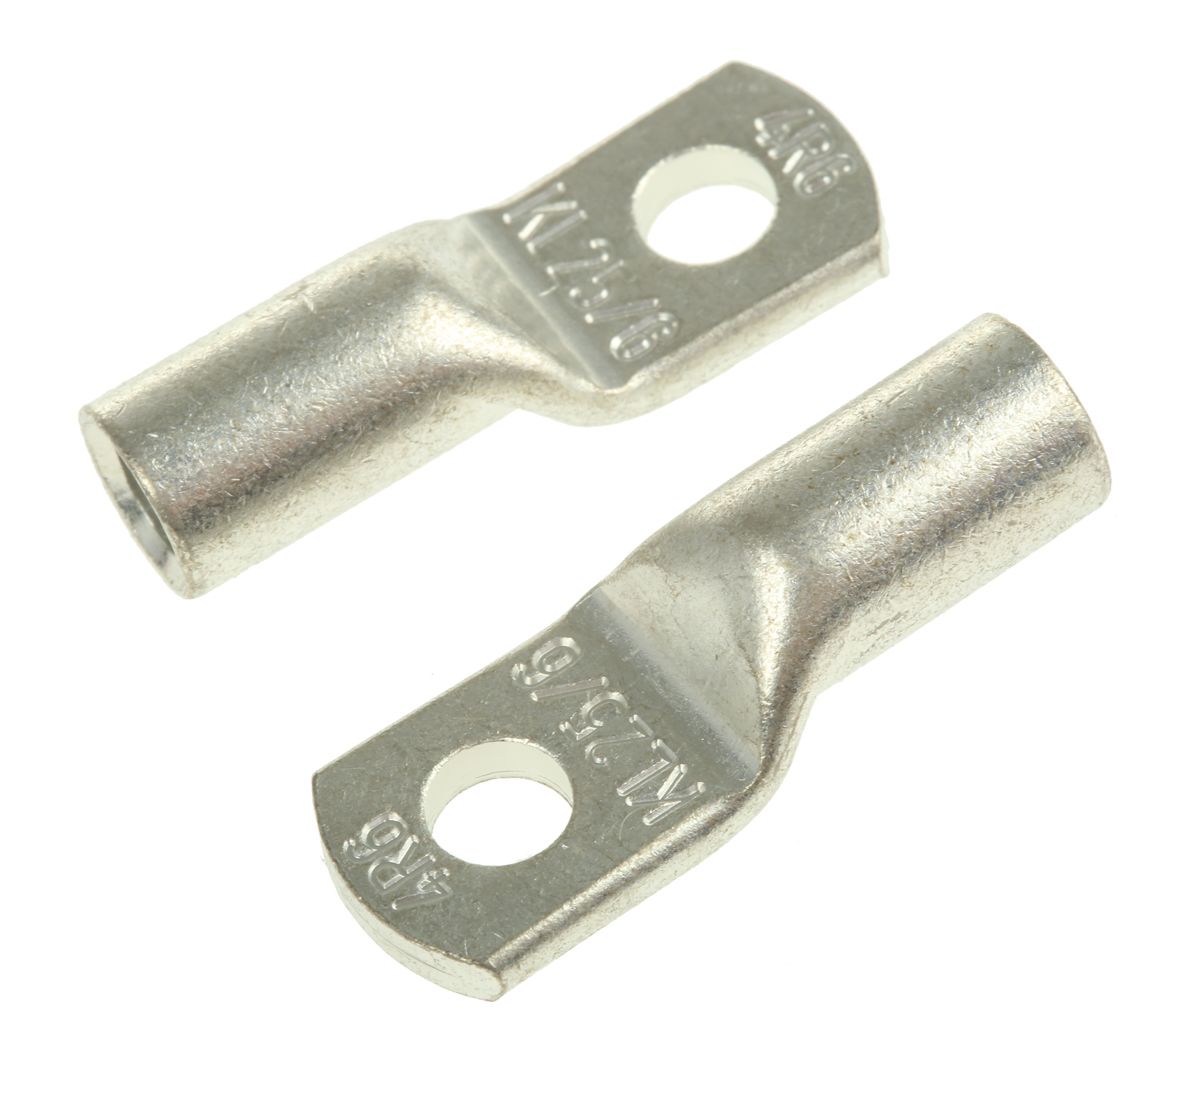 Klauke Uninsulated Ring Terminal, M6 Stud Size, 7mm² to 25mm² Wire Size